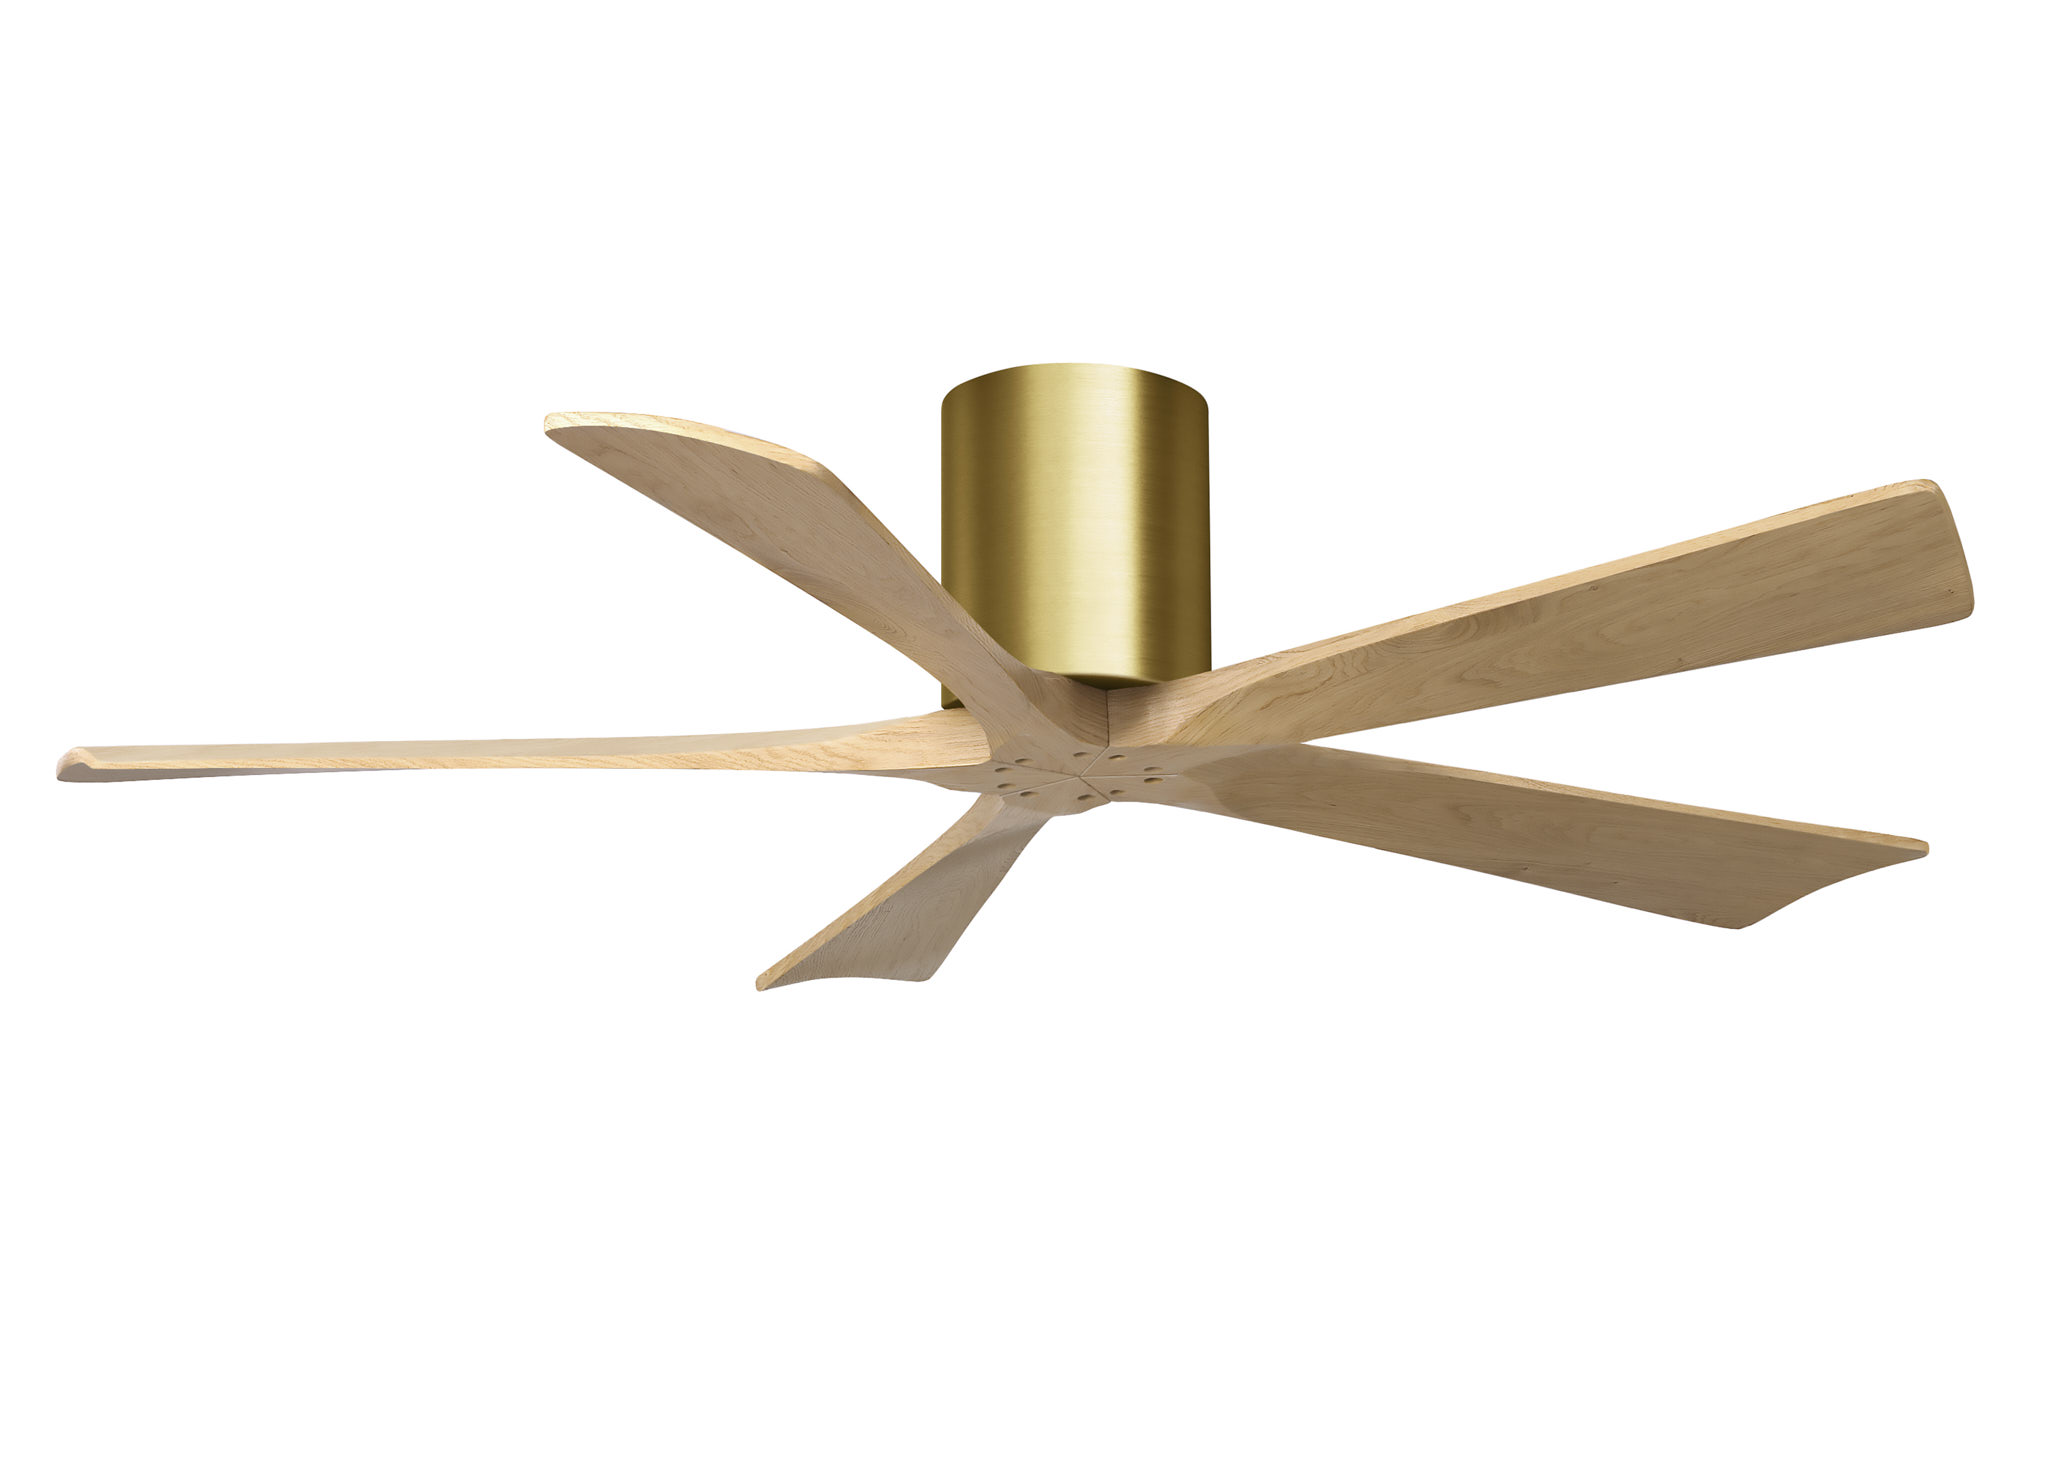 Irene-5H 6-speed ceiling fan in brushed brass finish with 52